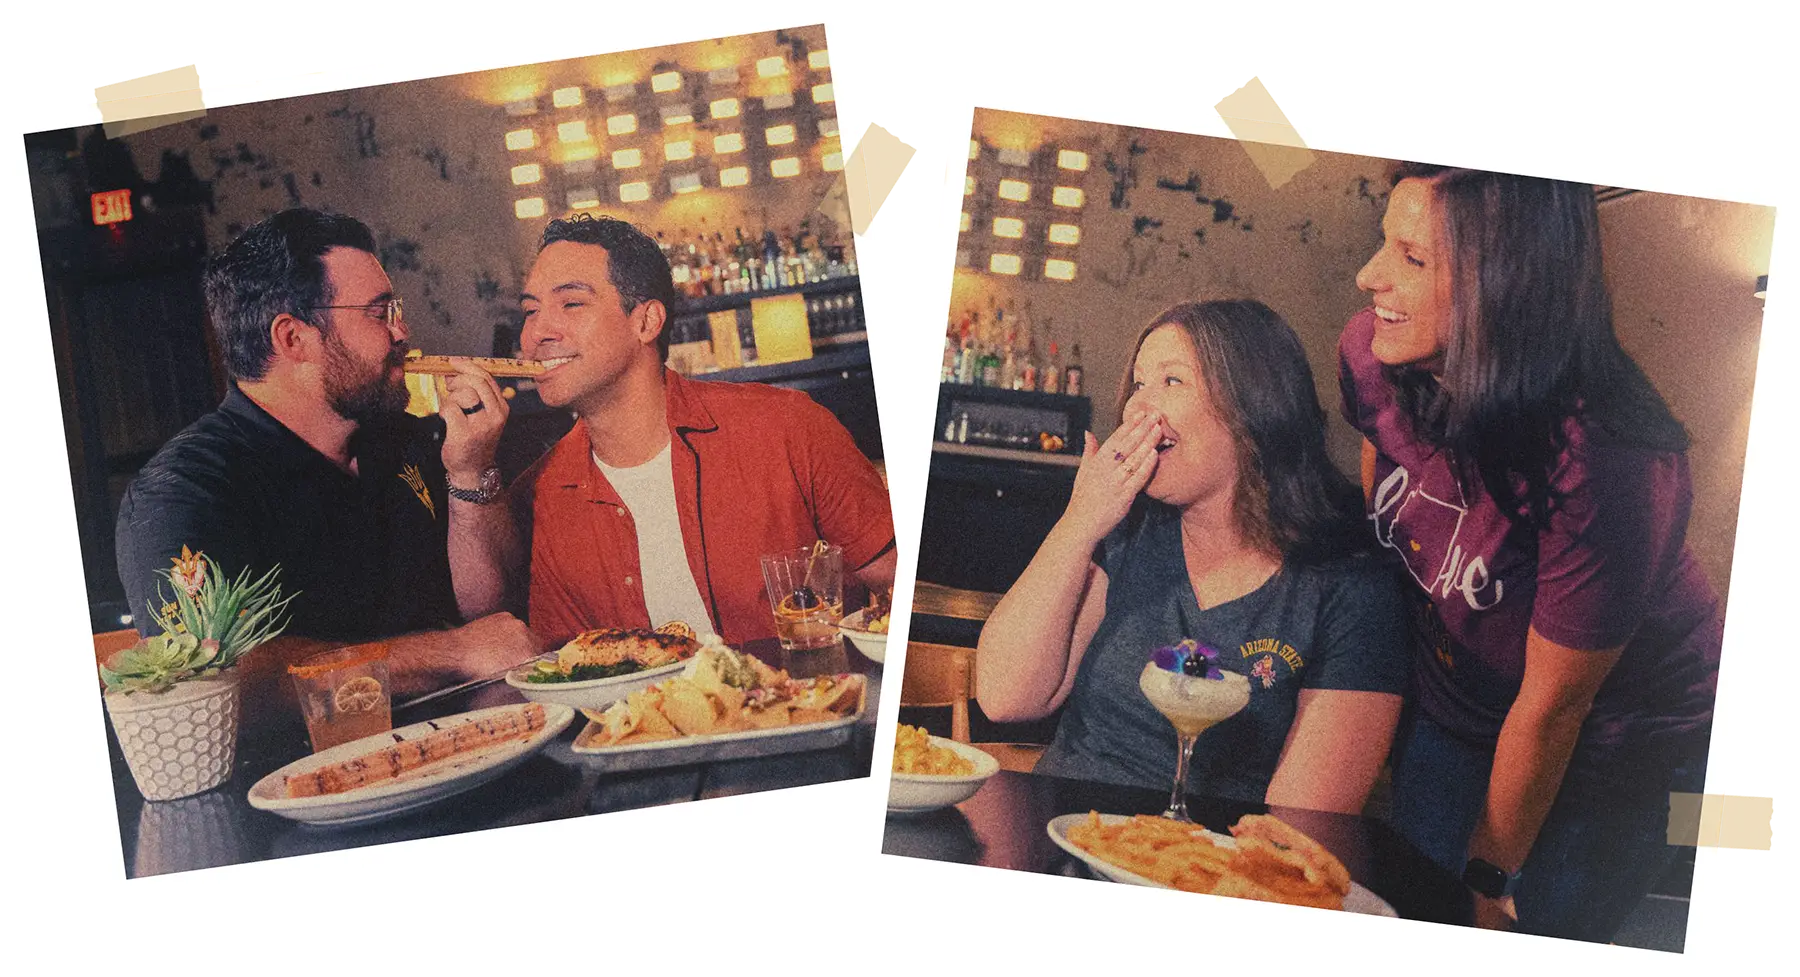 two men sharing a slice of pizza together and two of their female friends laughing with them